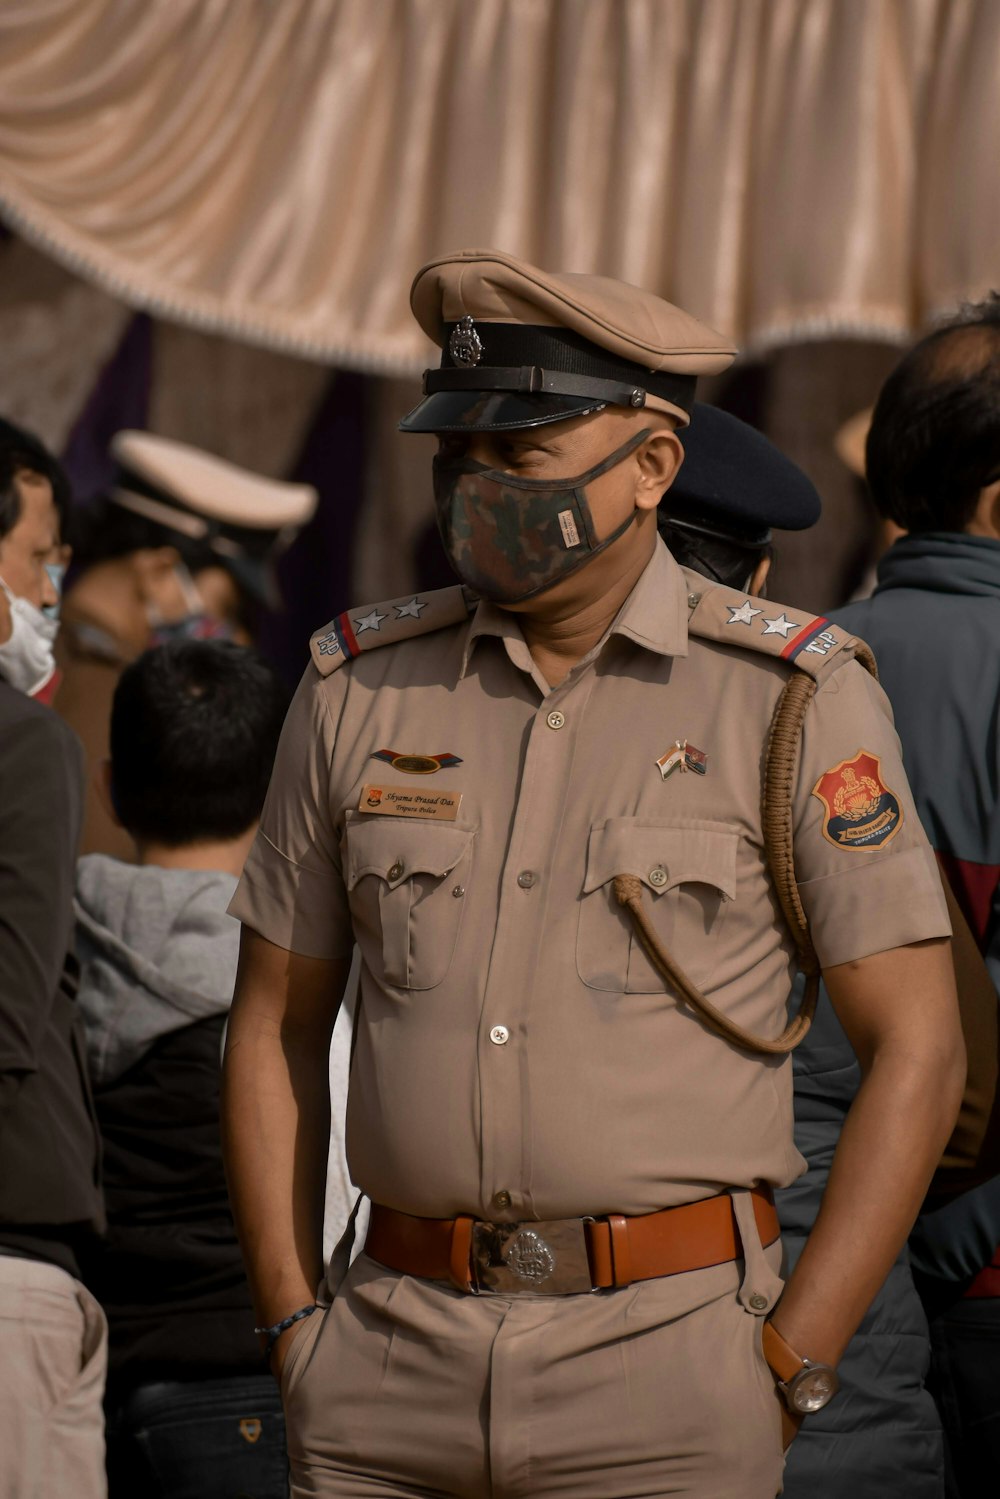 indian police icon